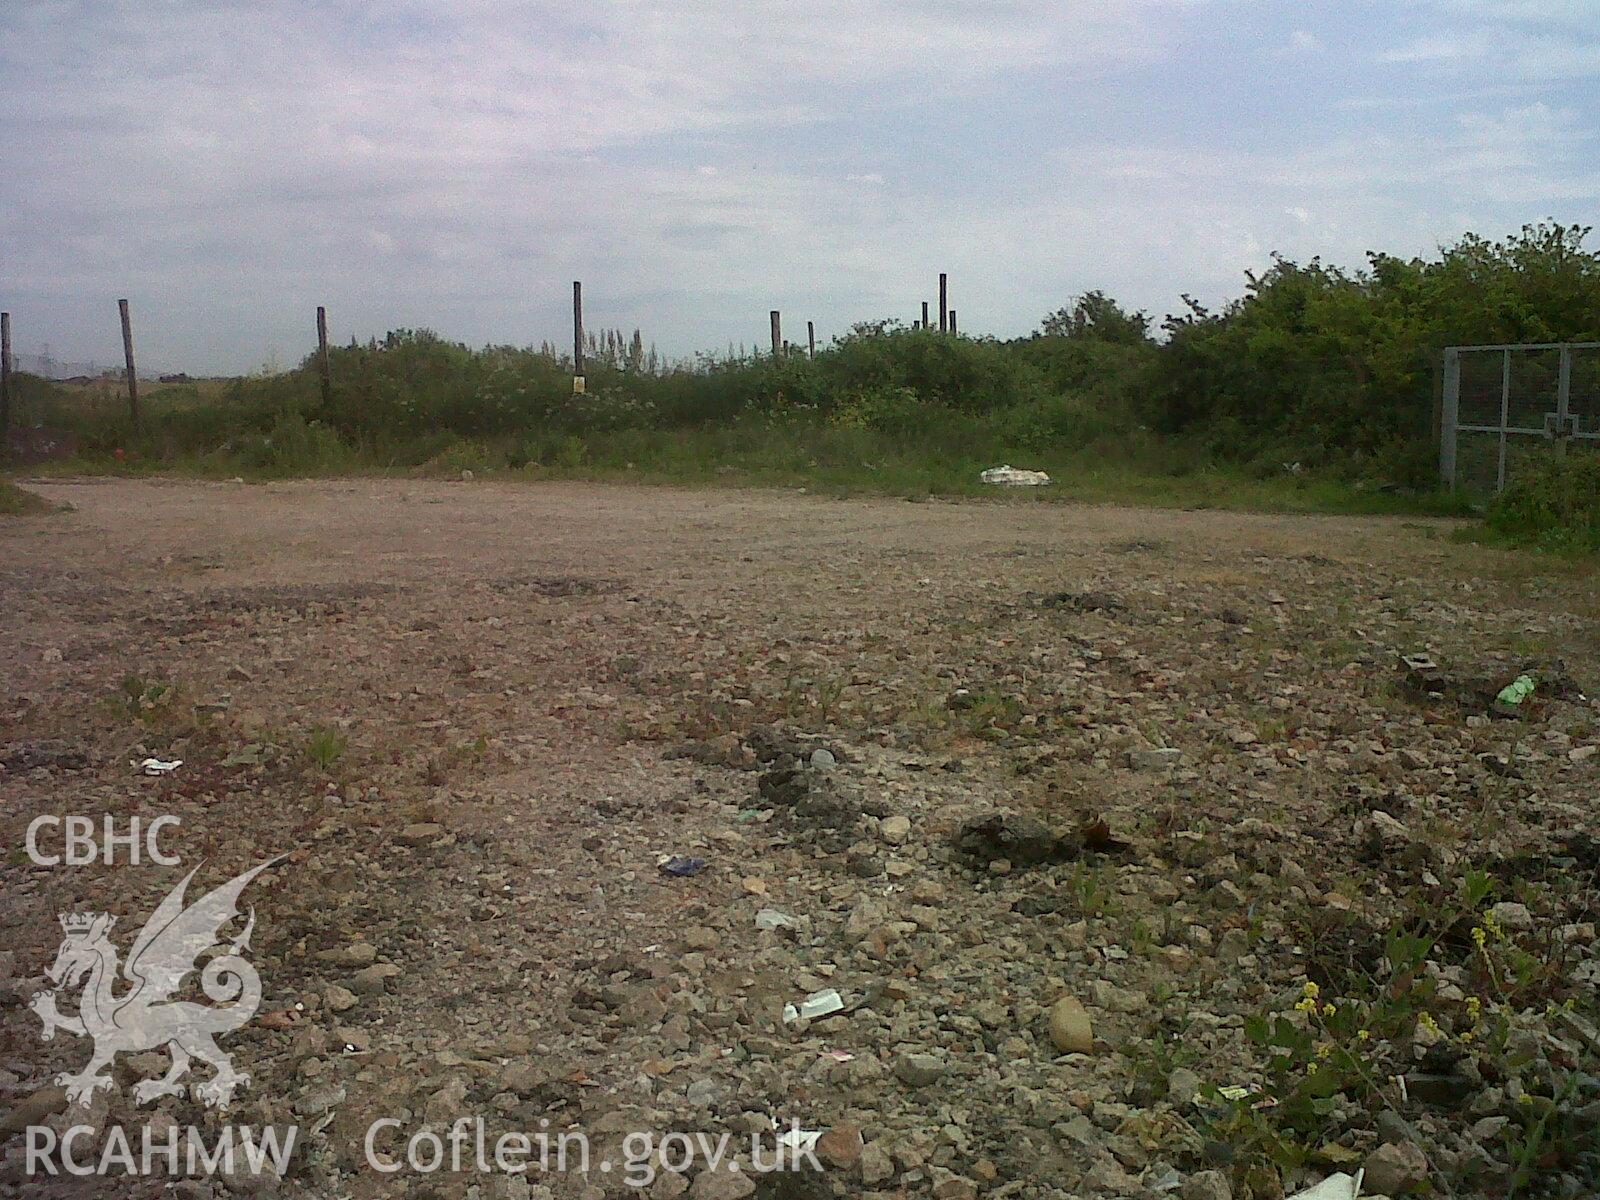 Digital photo taken during archaeological evaluation at Composting Facility, Lamby Way, Rumney carried out by Cotswold Archaeology, June 2012.